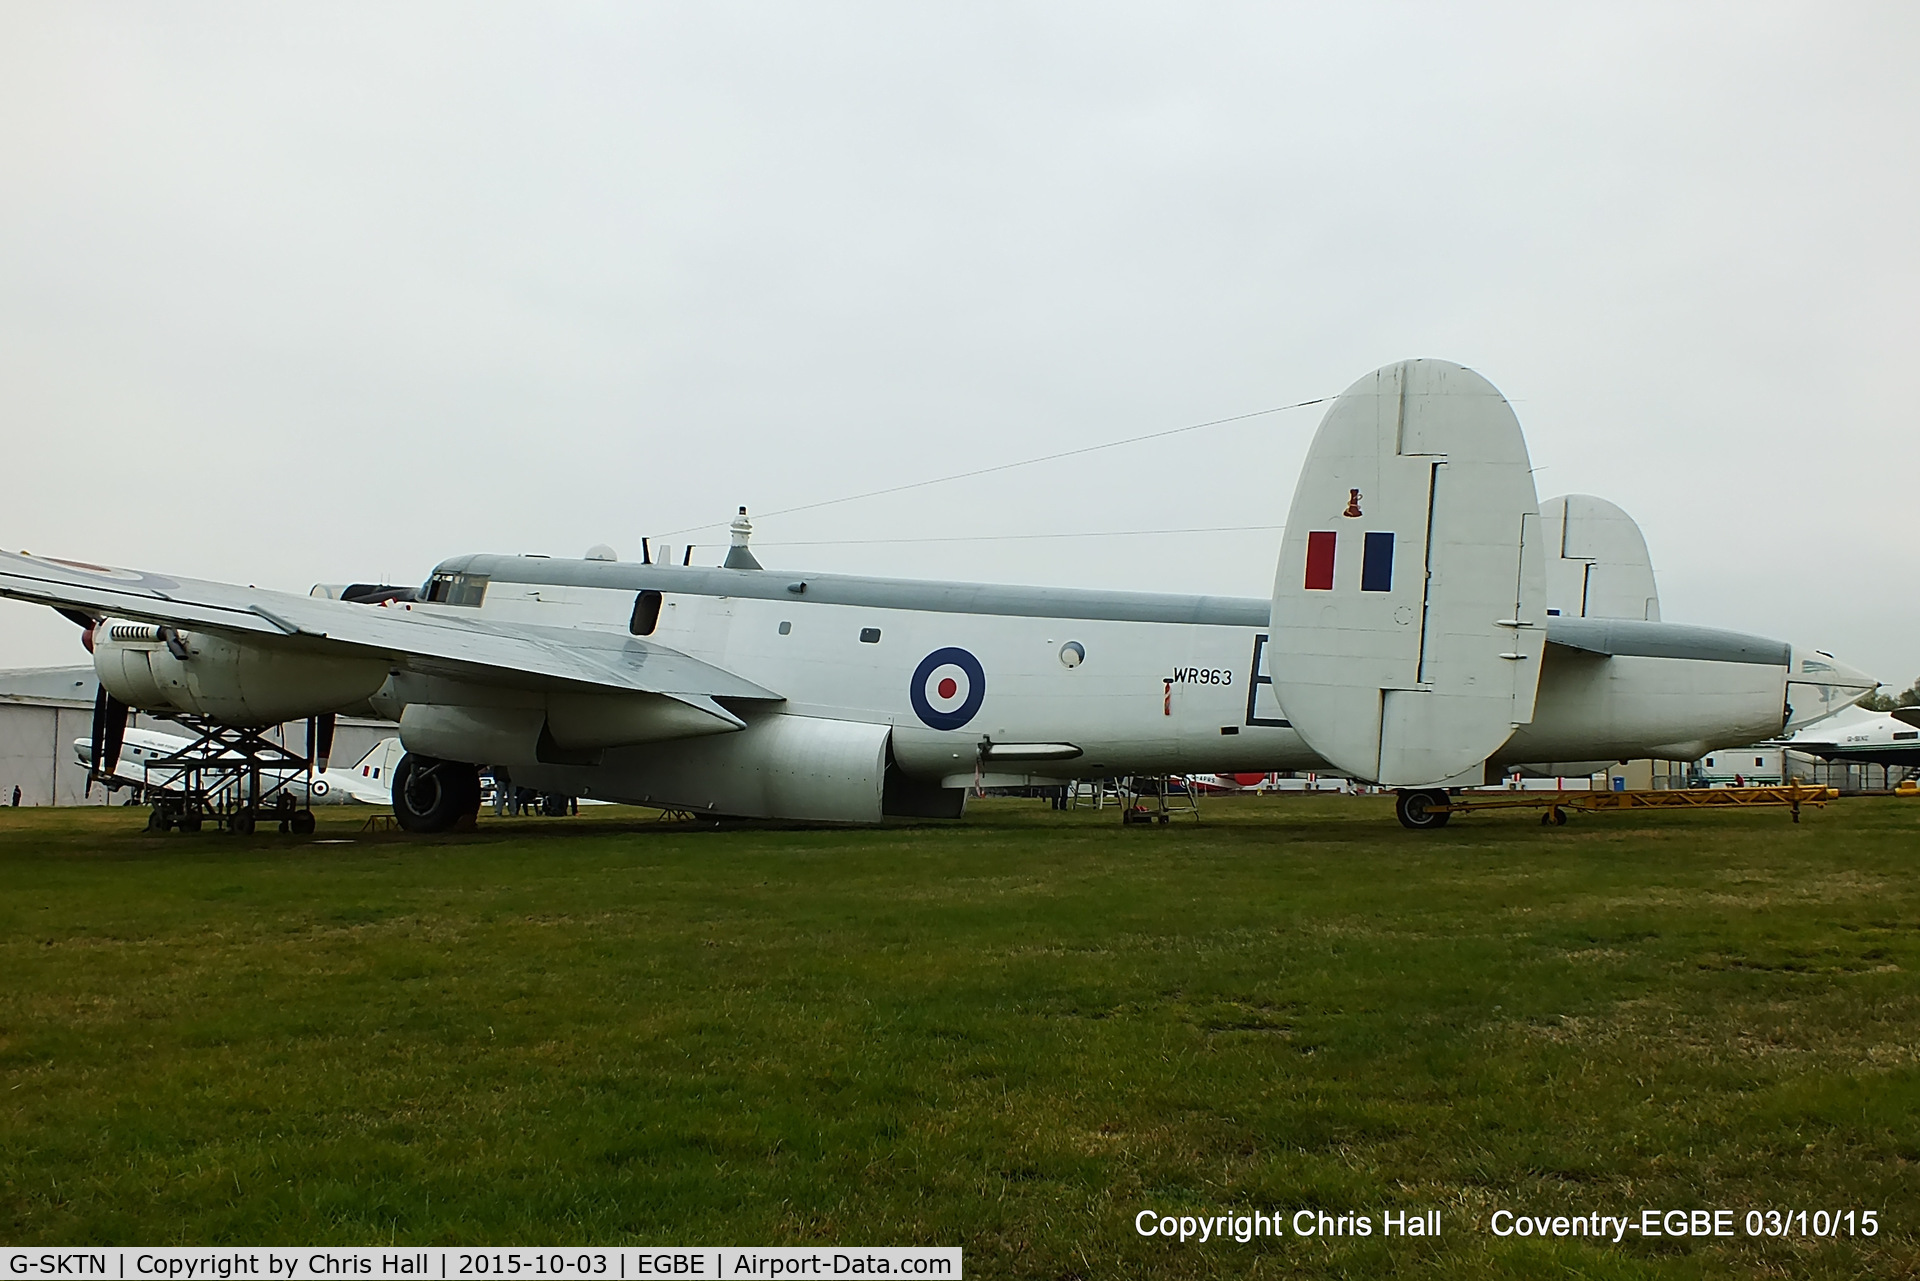 G-SKTN, 1954 Avro 696 Shackleton AEW.2 C/N Not found WR963, being restored to flying condition by The 'Friends of WR963'